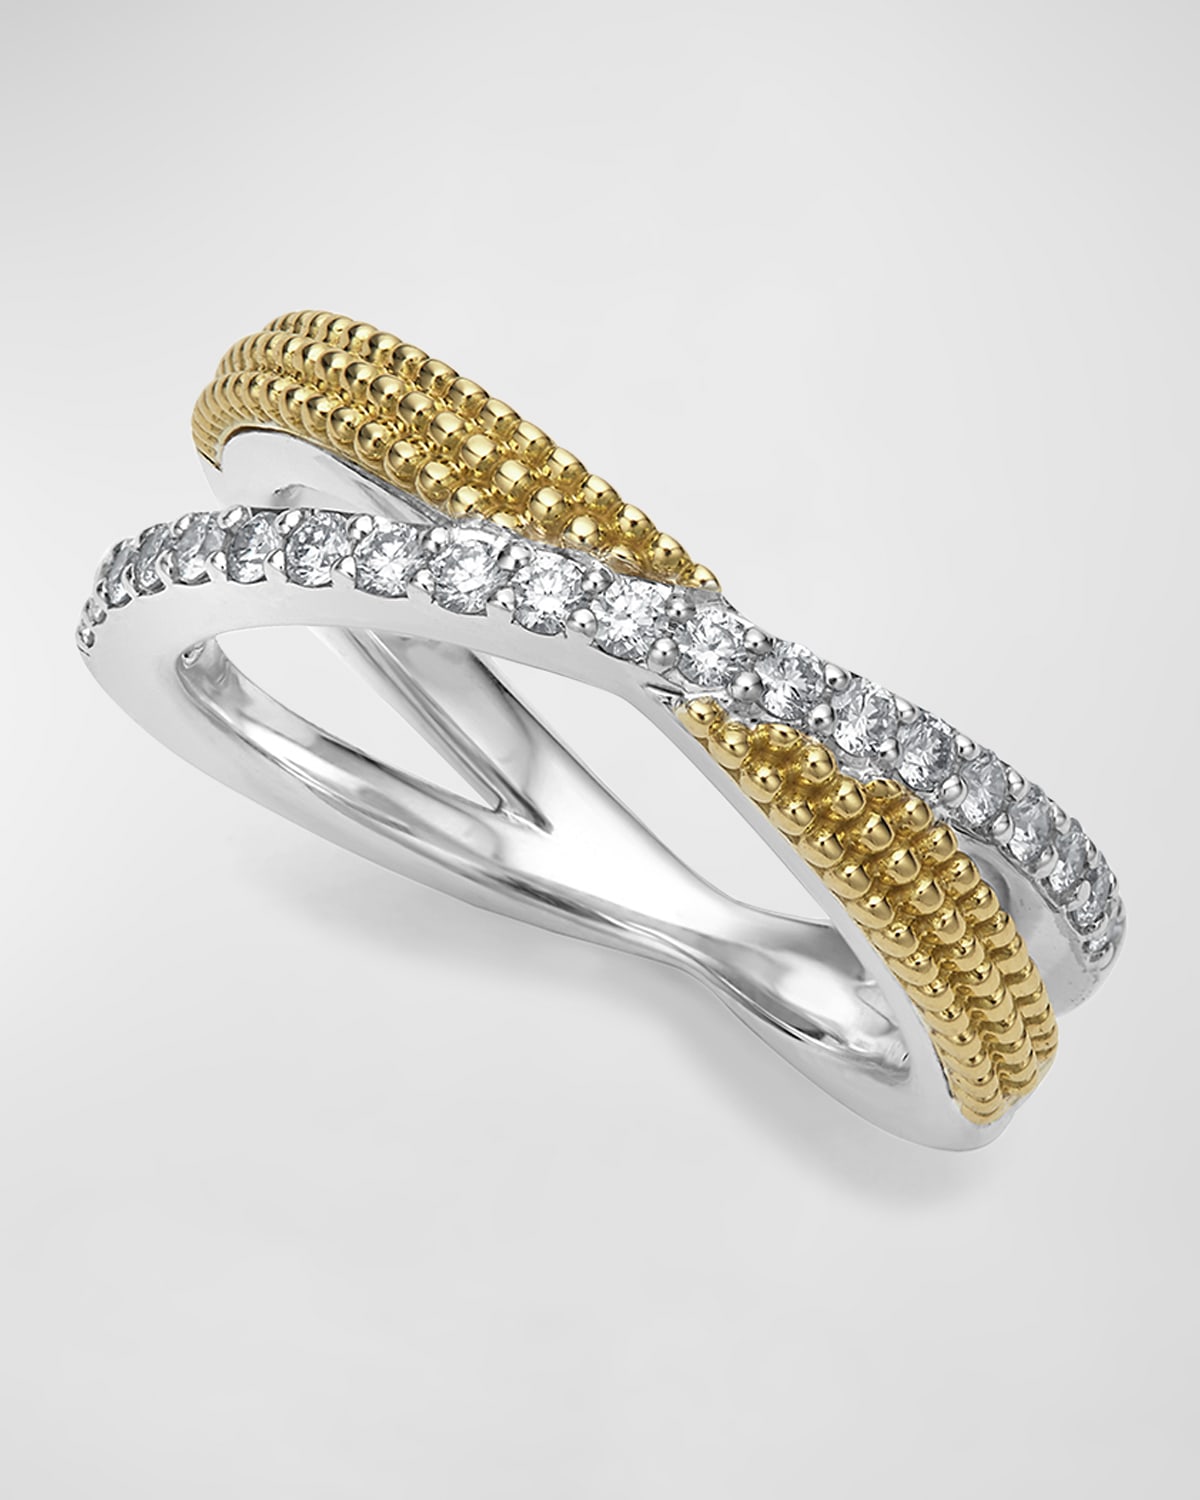 Sterling Silver & 18k Yellow Gold Caviar X Ring